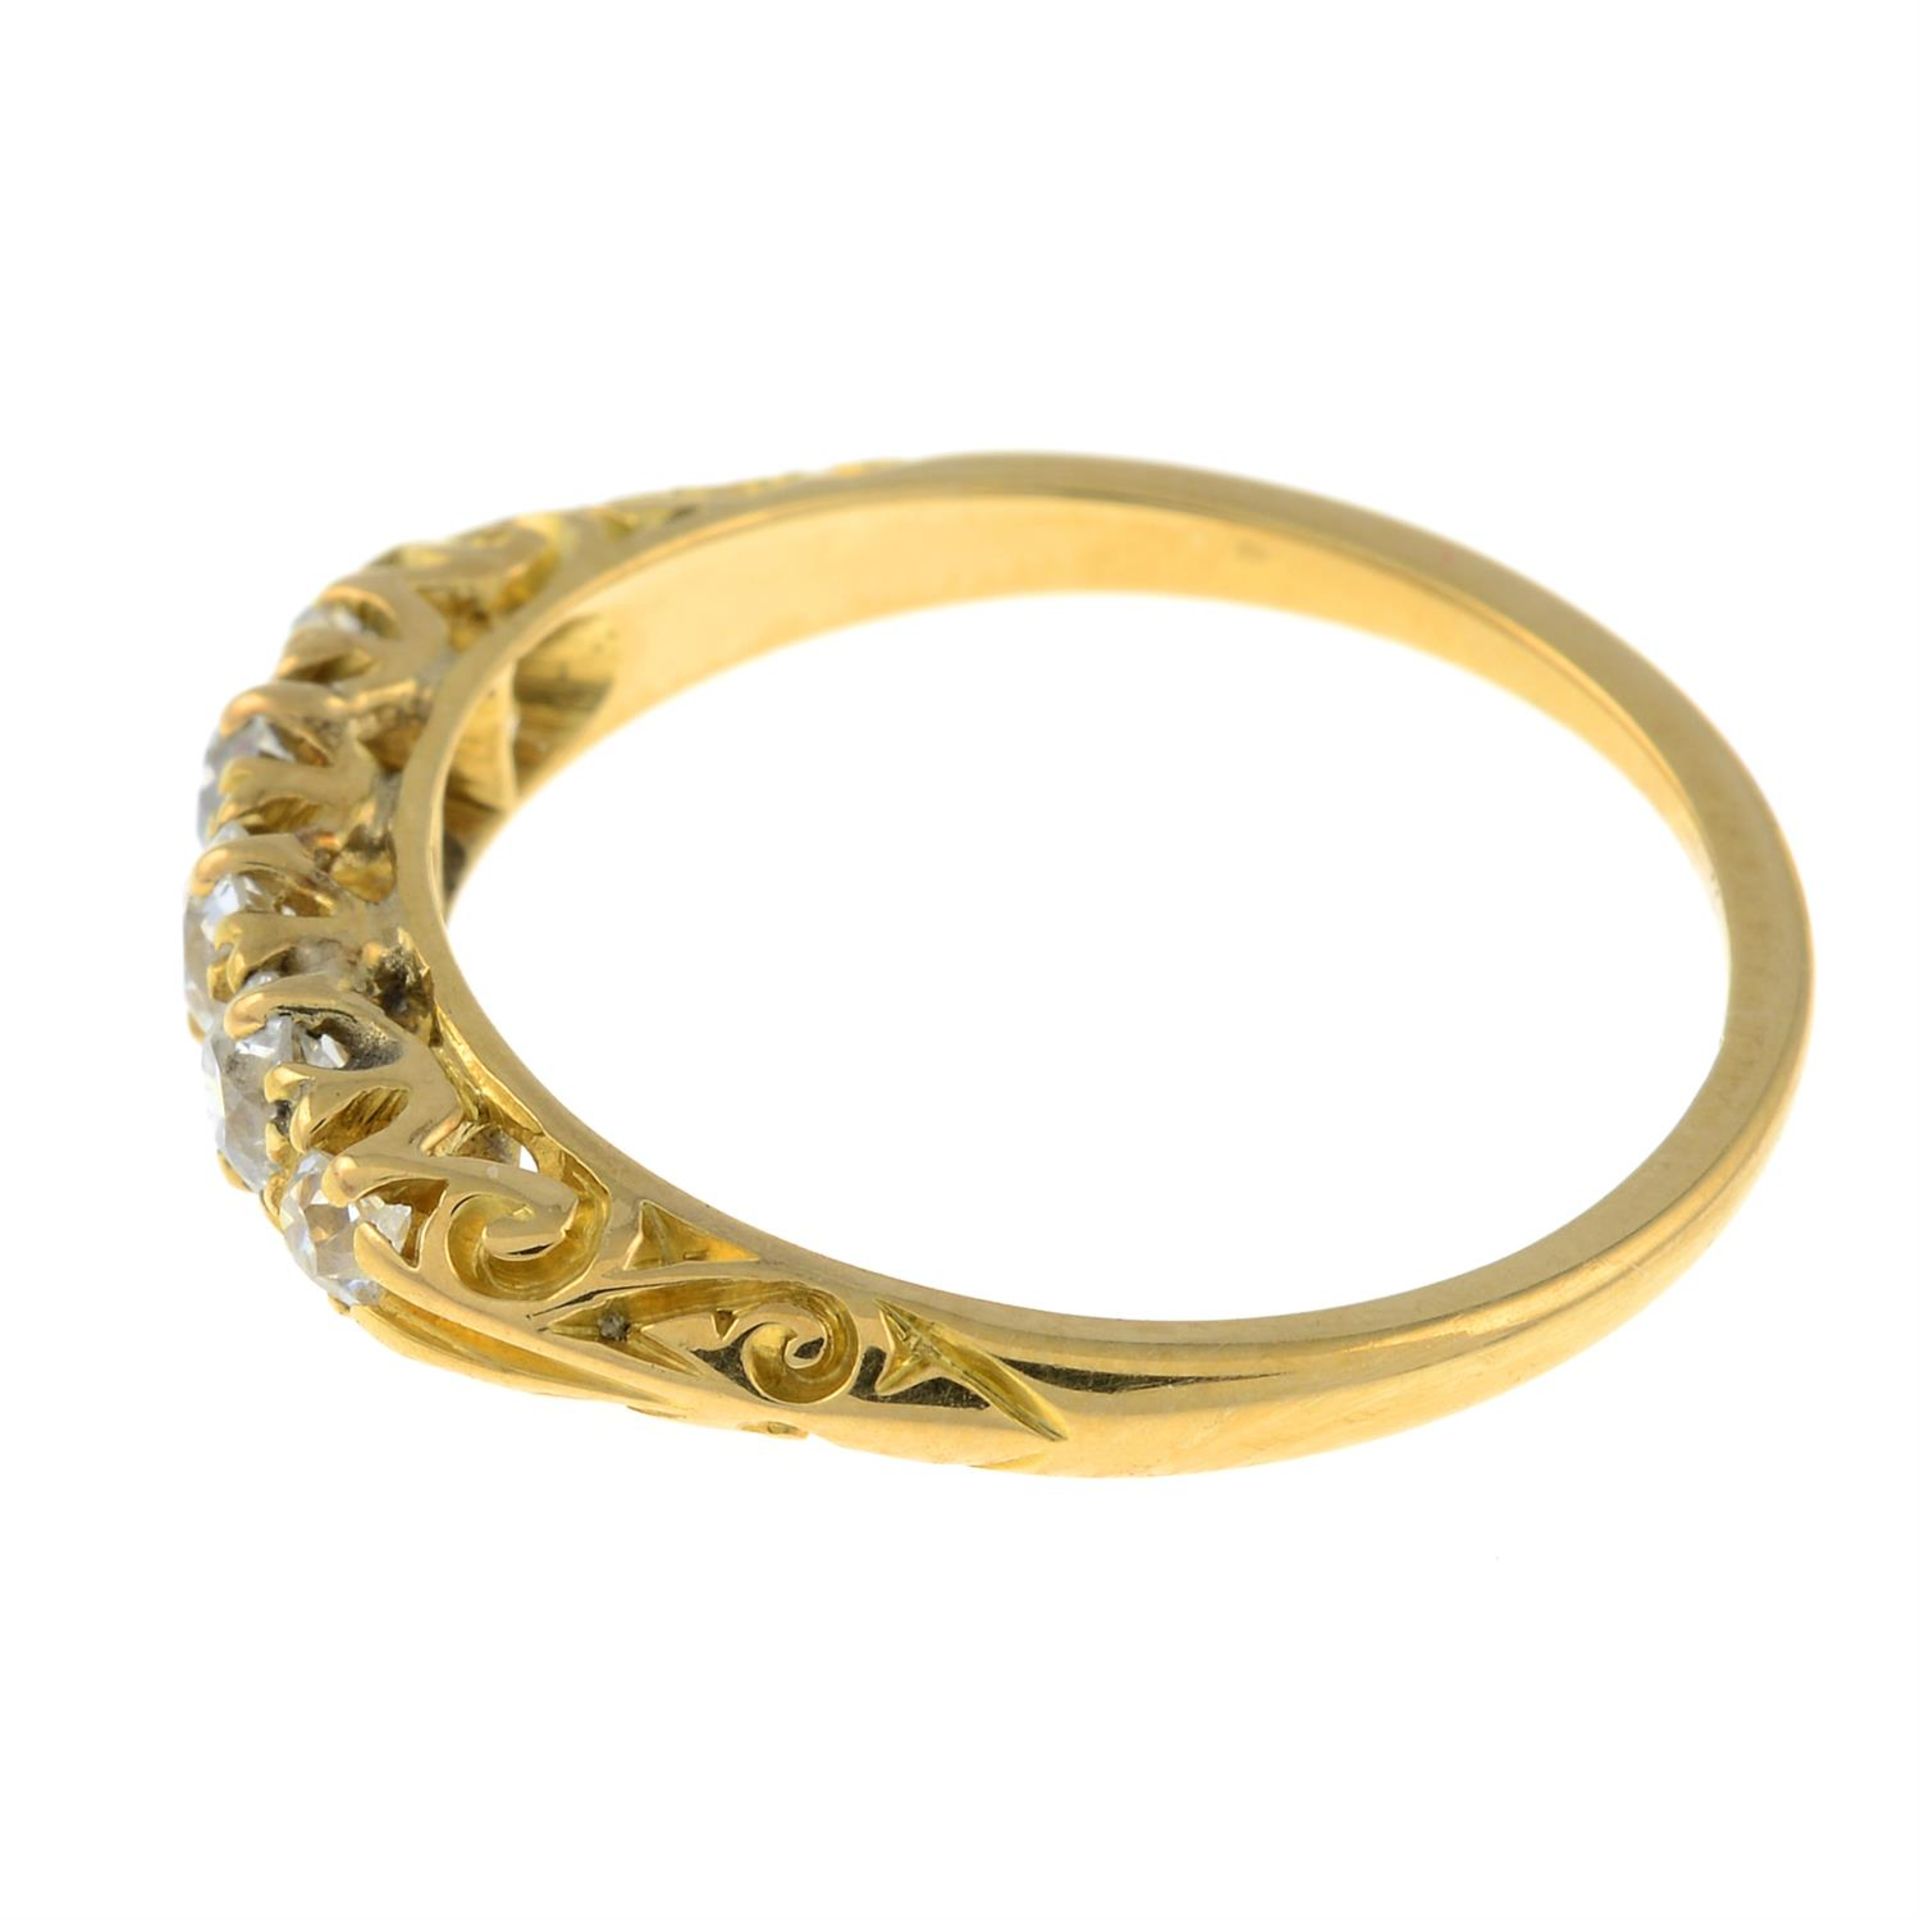 An early 20th century 18ct gold old-cut diamond five-stone ring. - Image 2 of 3